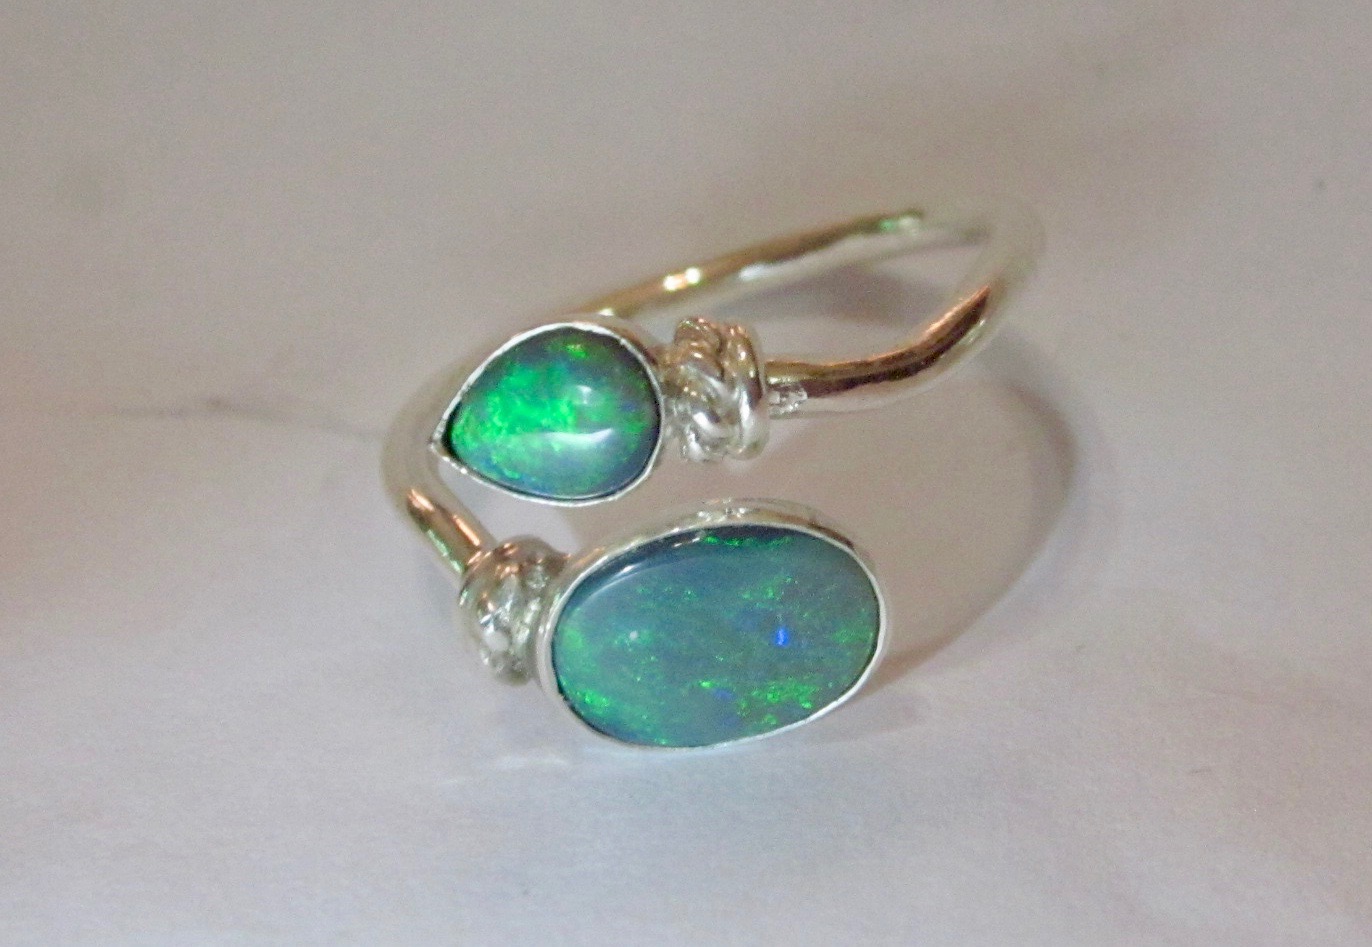 Opal rings Guaranteed 100% all natural Australian opals in the ring.